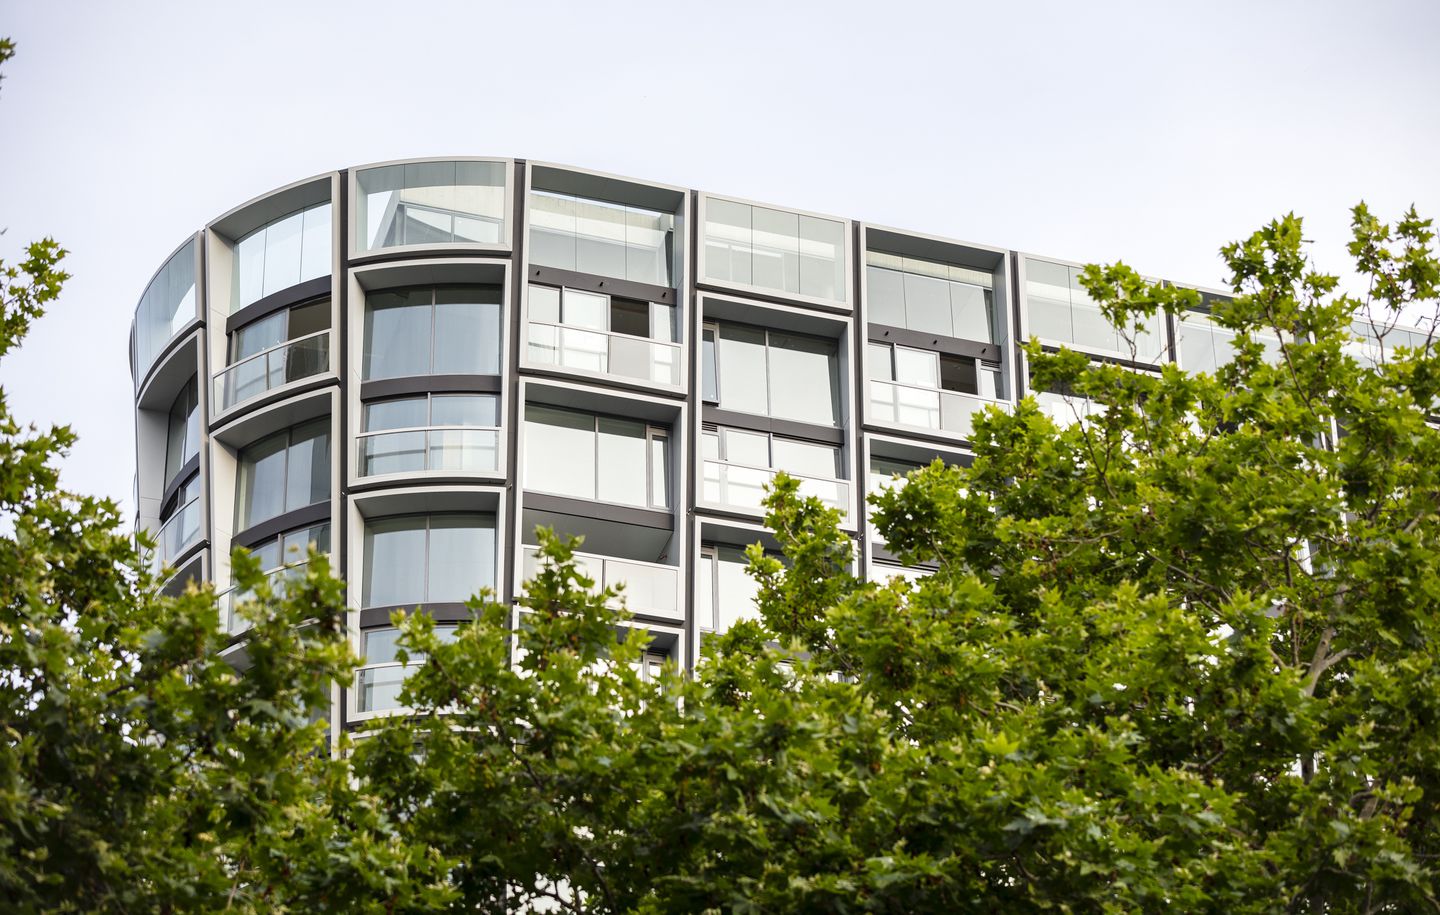 Close up view of Omnia Apartment building behind tree in Potts Point Sydney designed by Durbach Block Jaggers Architects Sydney